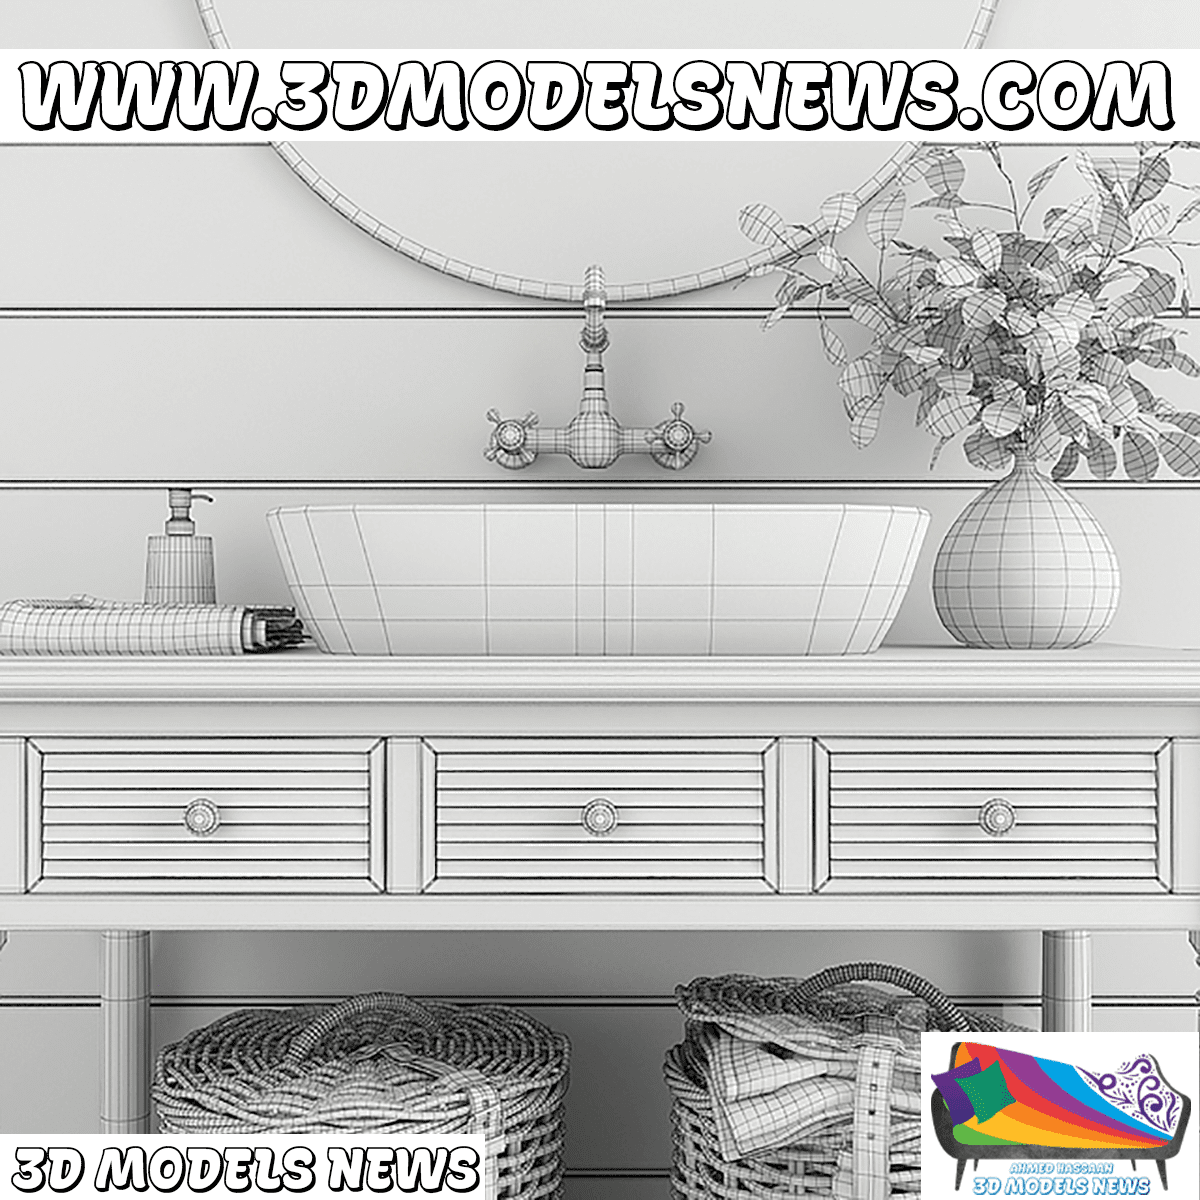 Modern console with basin style mirror and bathroom decor 2